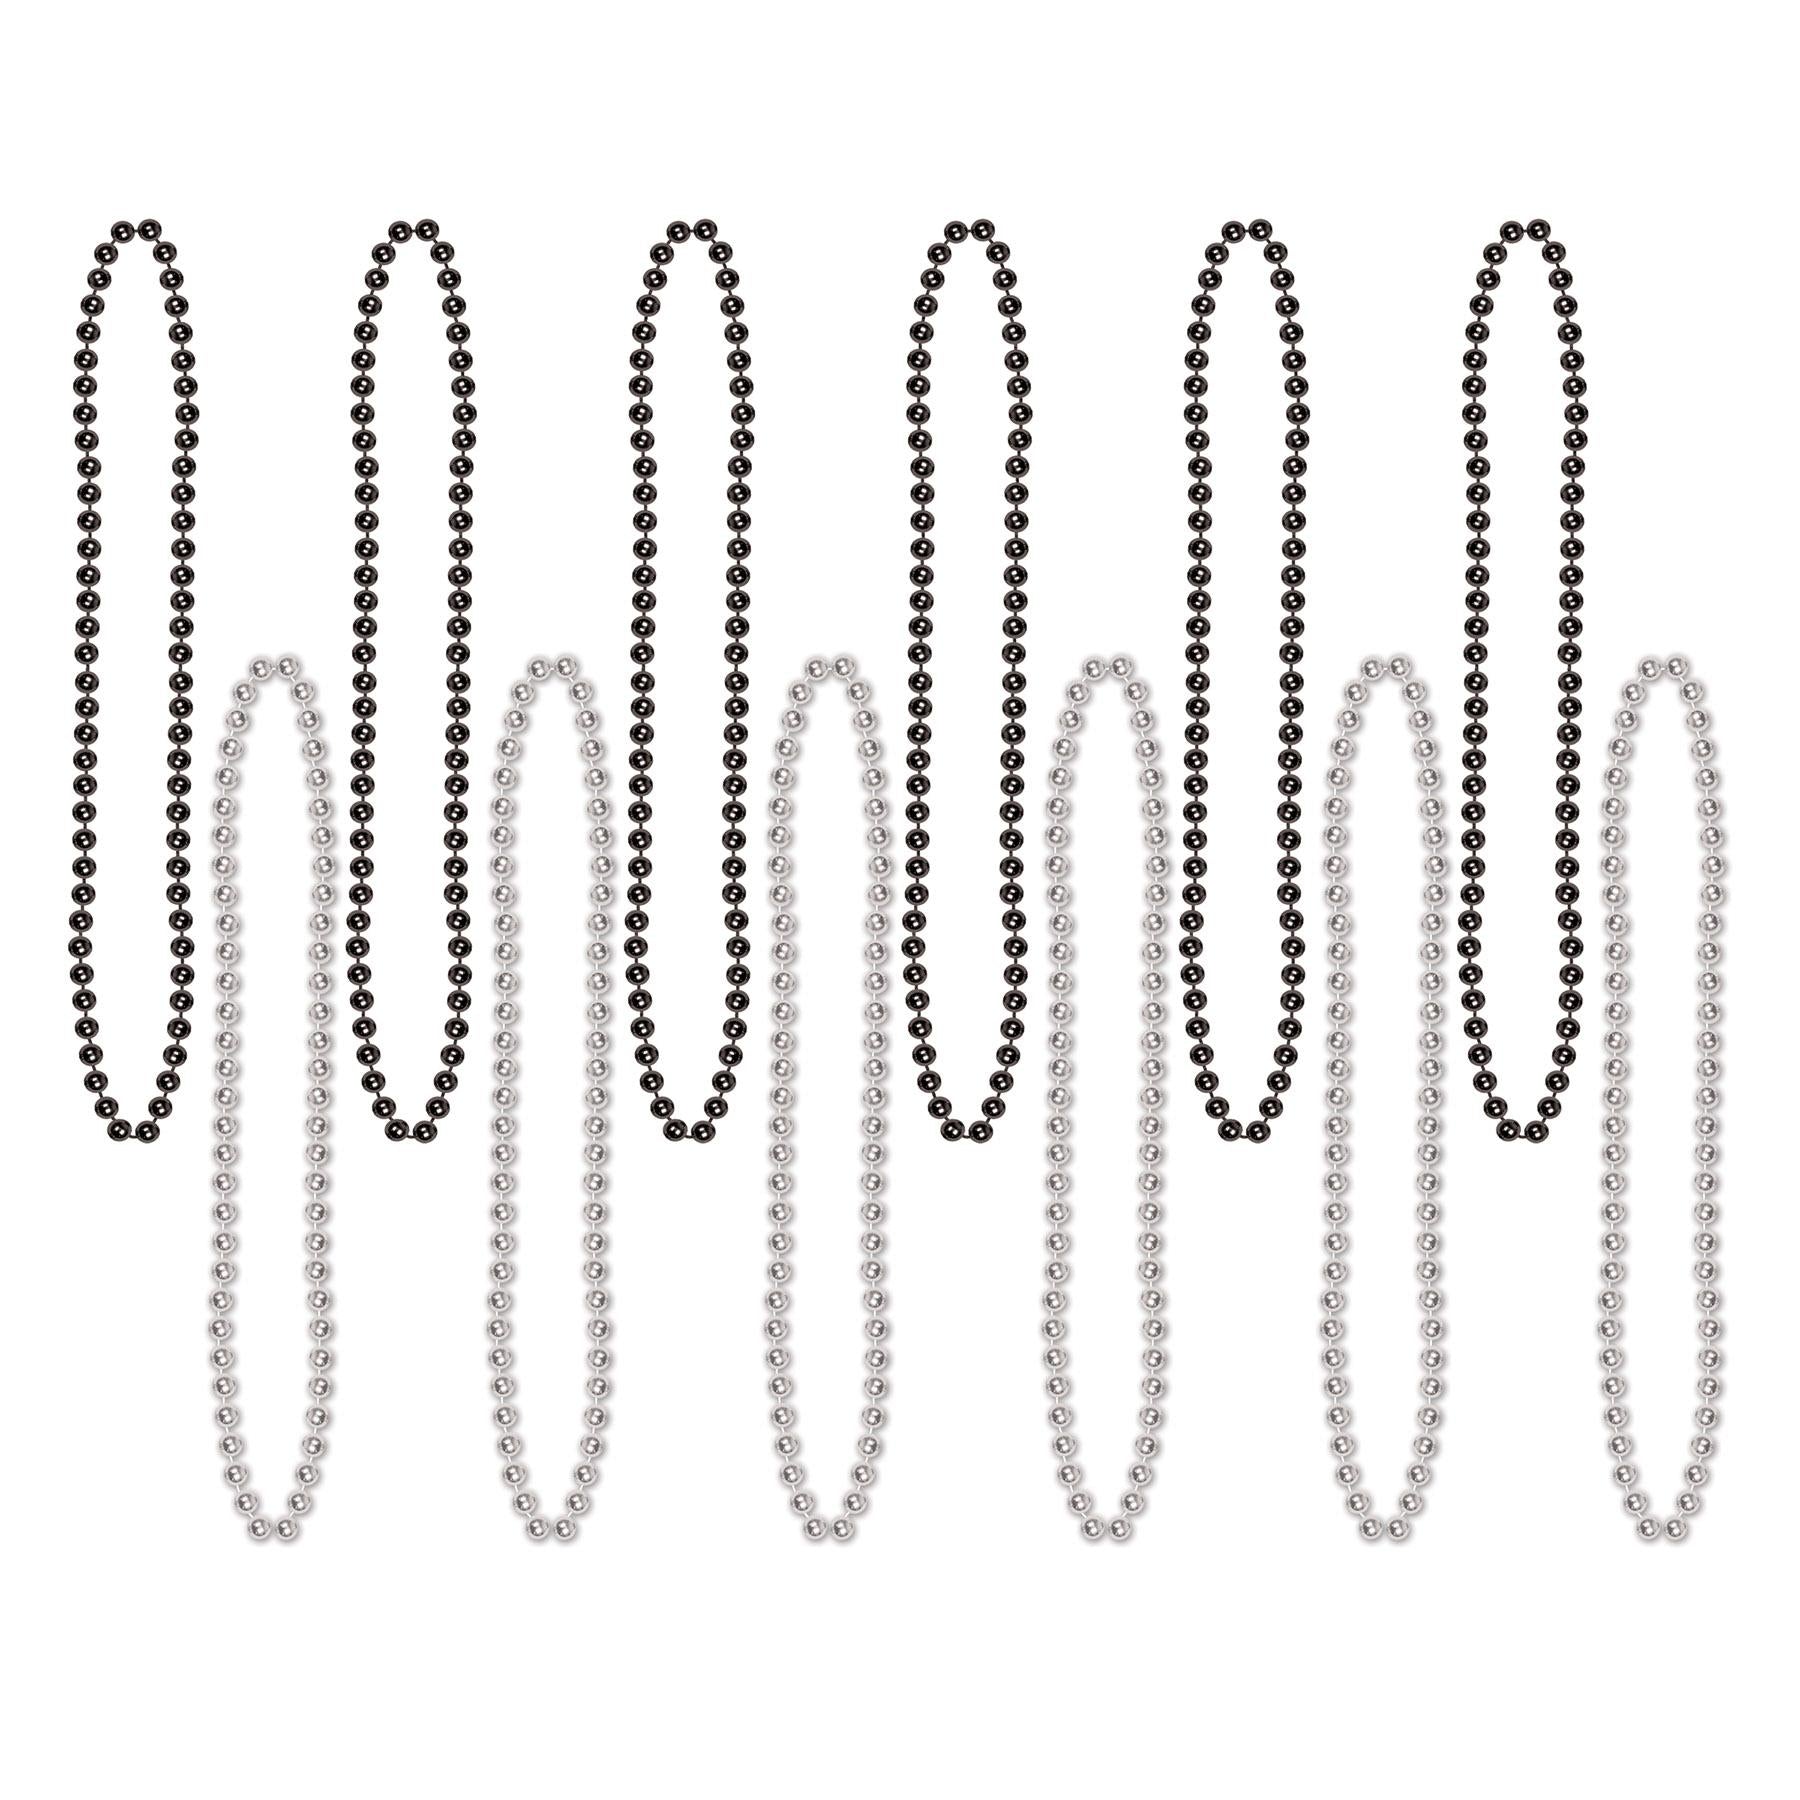 Party Bead Necklaces - Small Round black & silver (12/Pkg)